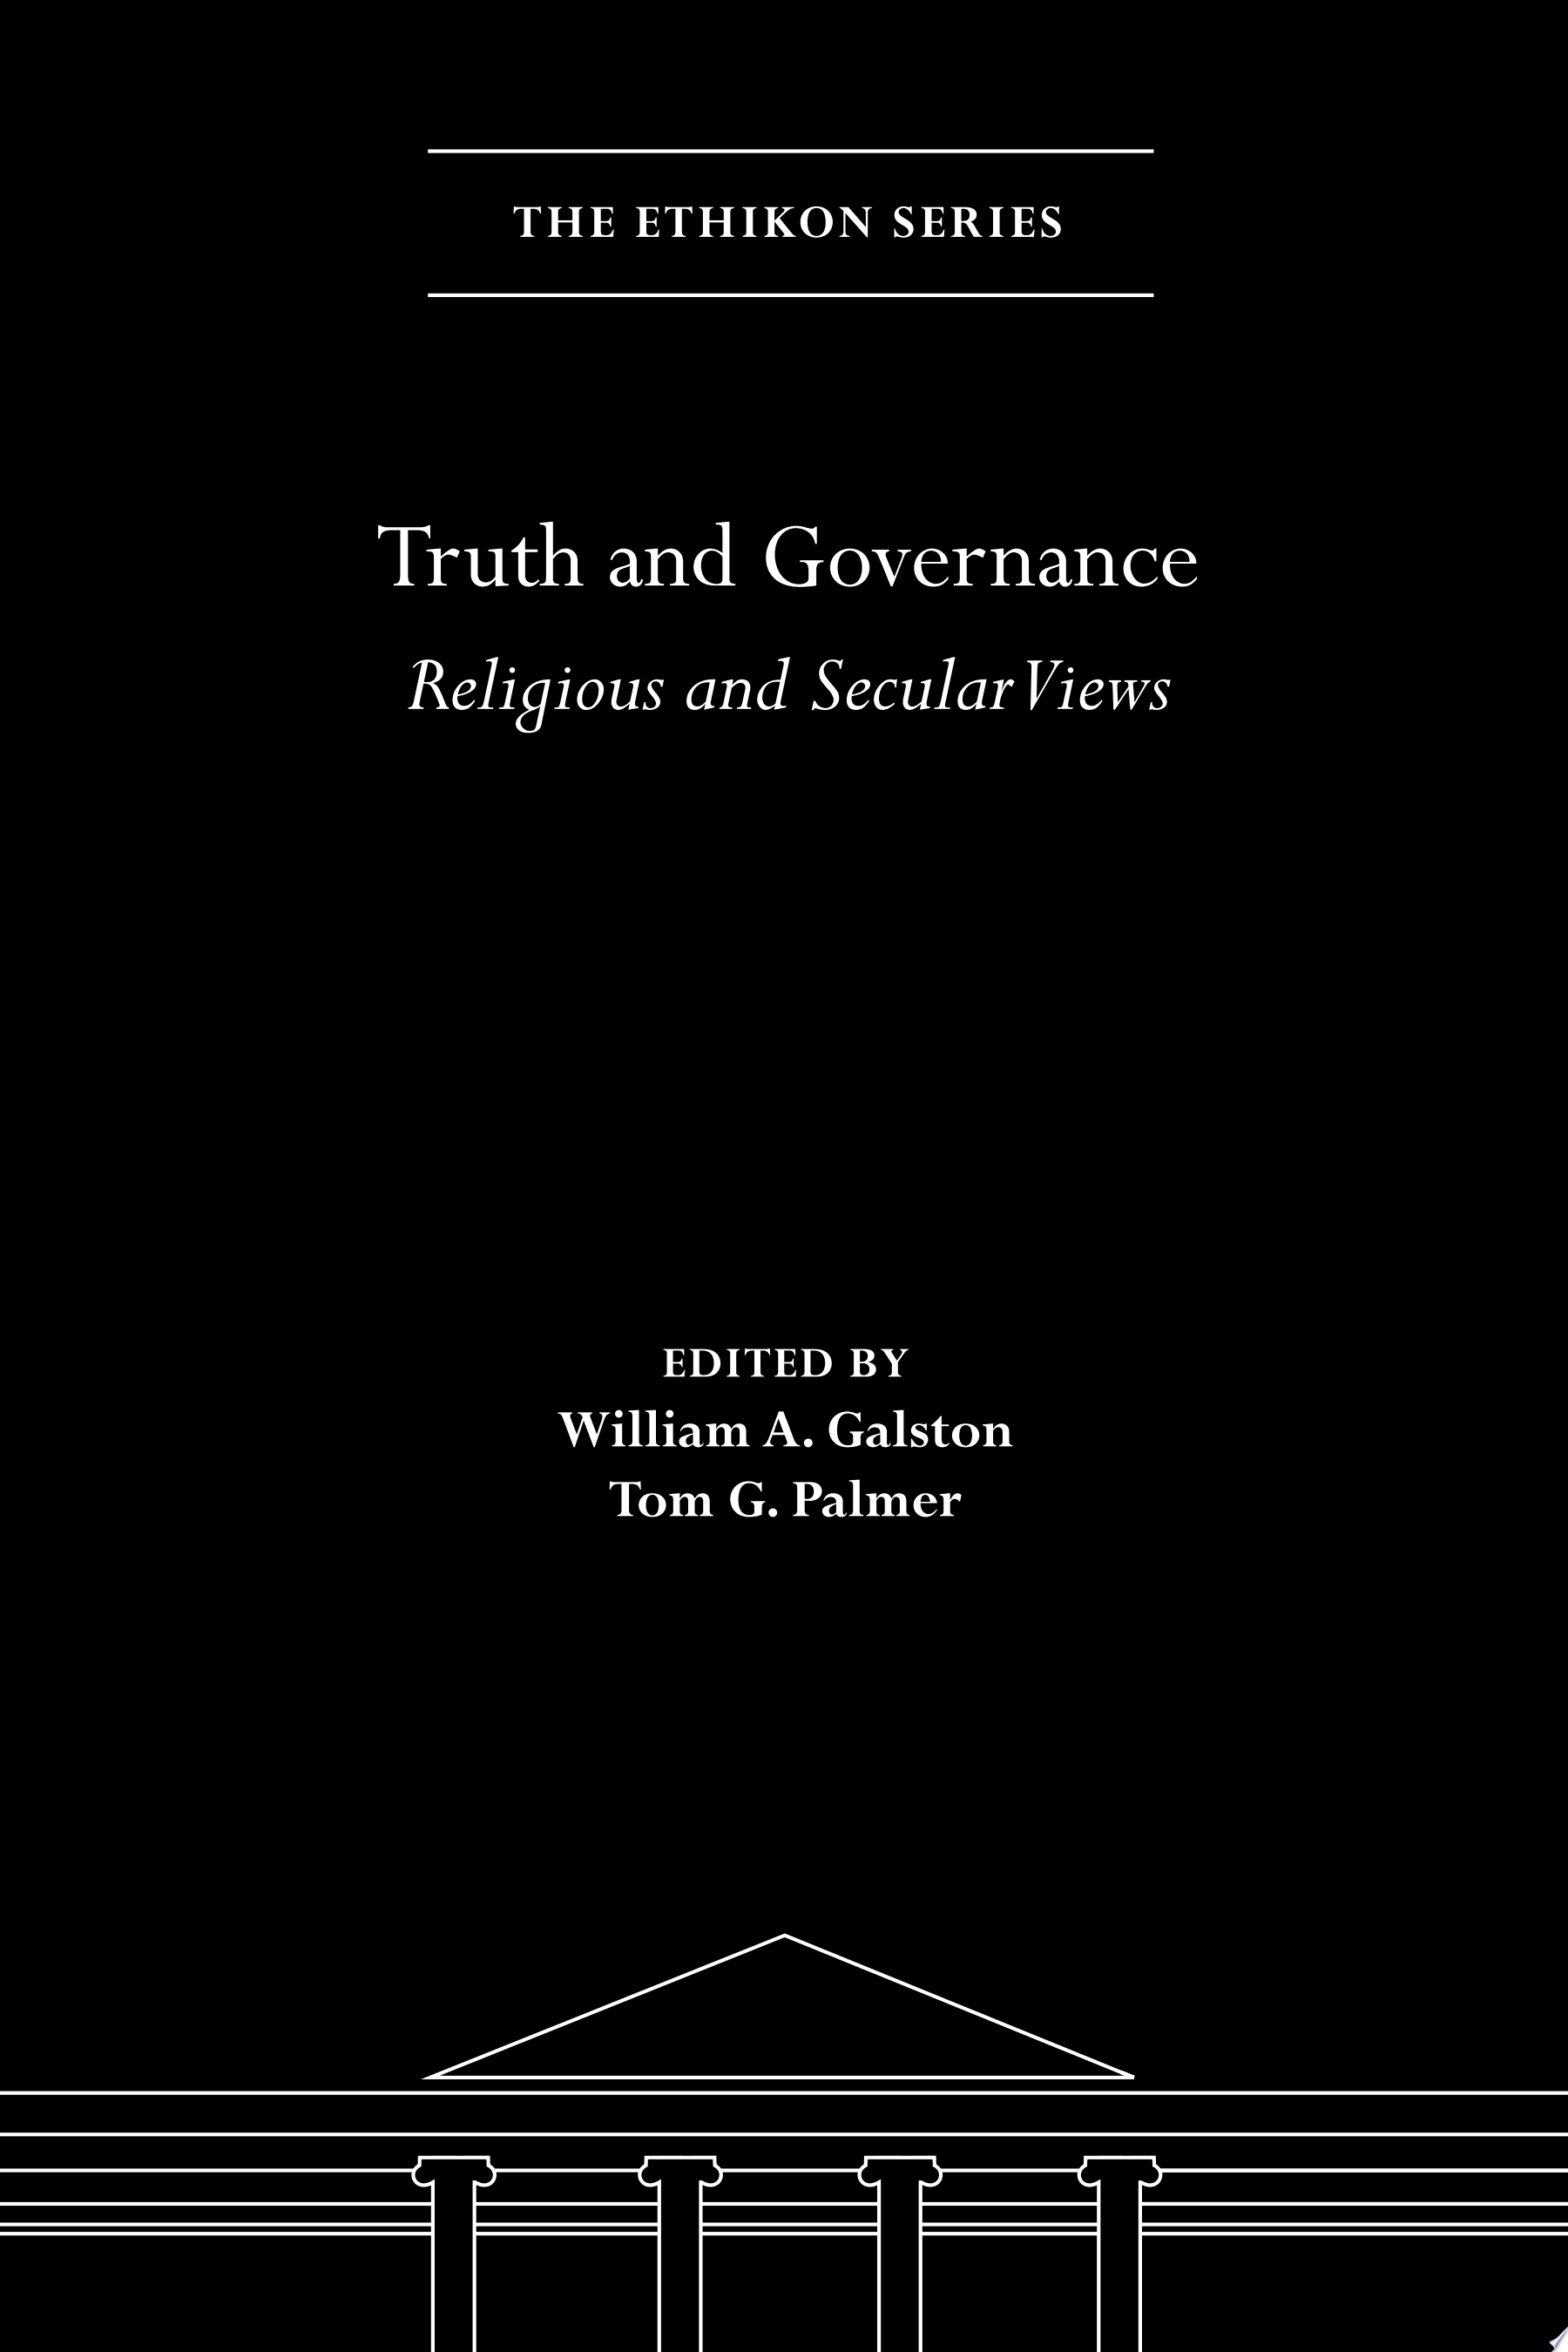 Truth and Governance: Religious and Secular Views